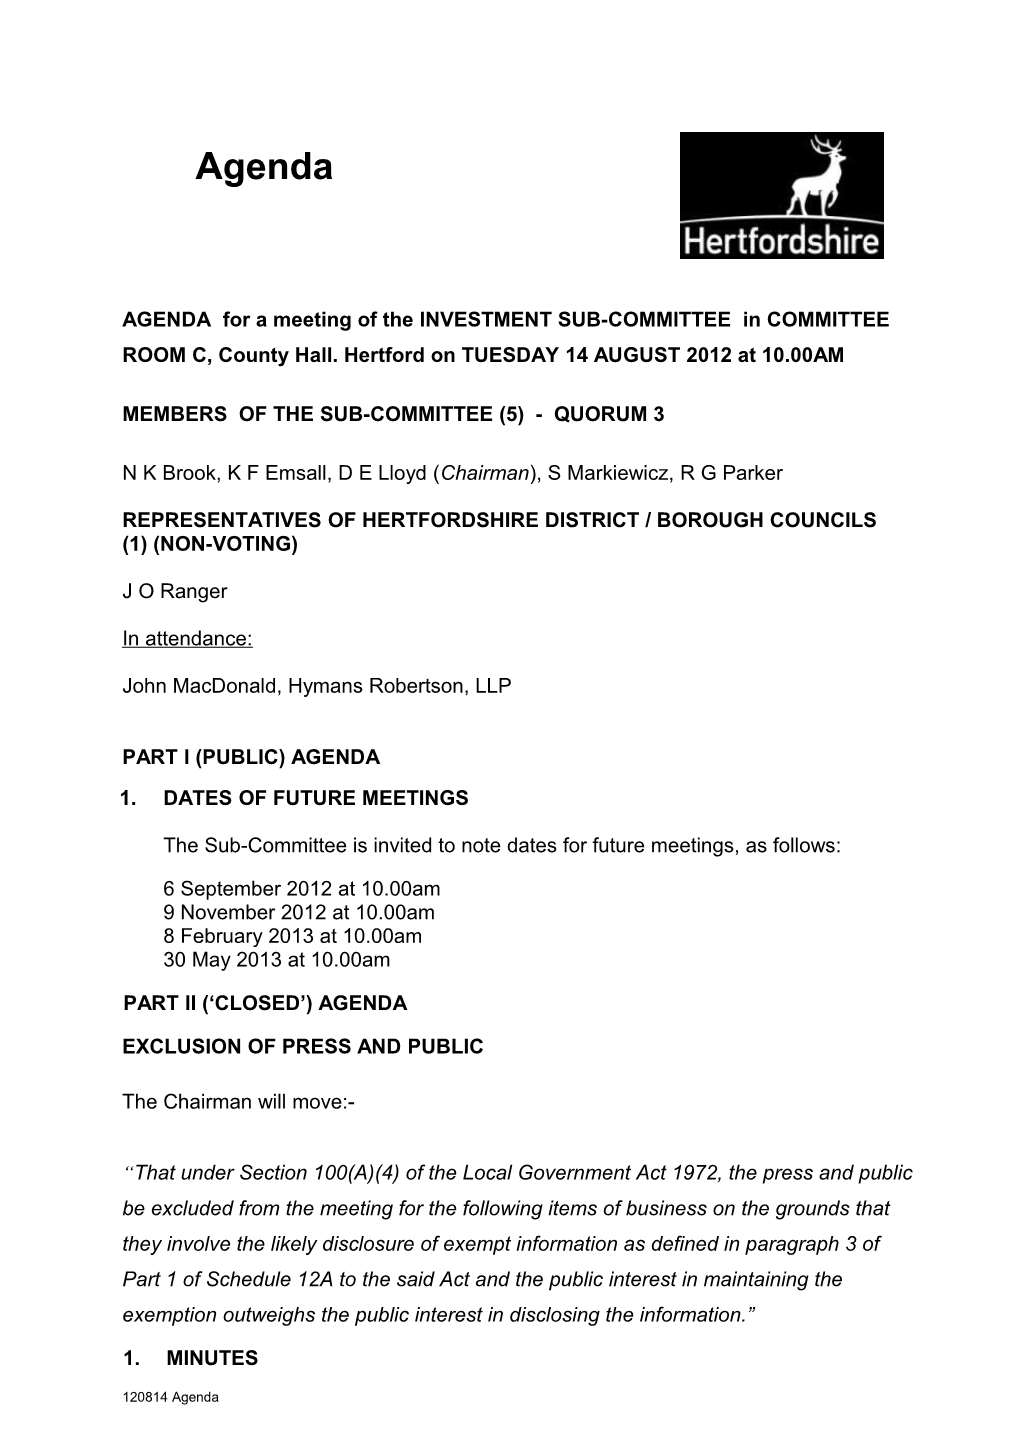 Agenda for a Meeting of the Investment Sub-Committee to Be Held on Tuesday 14 August 2012